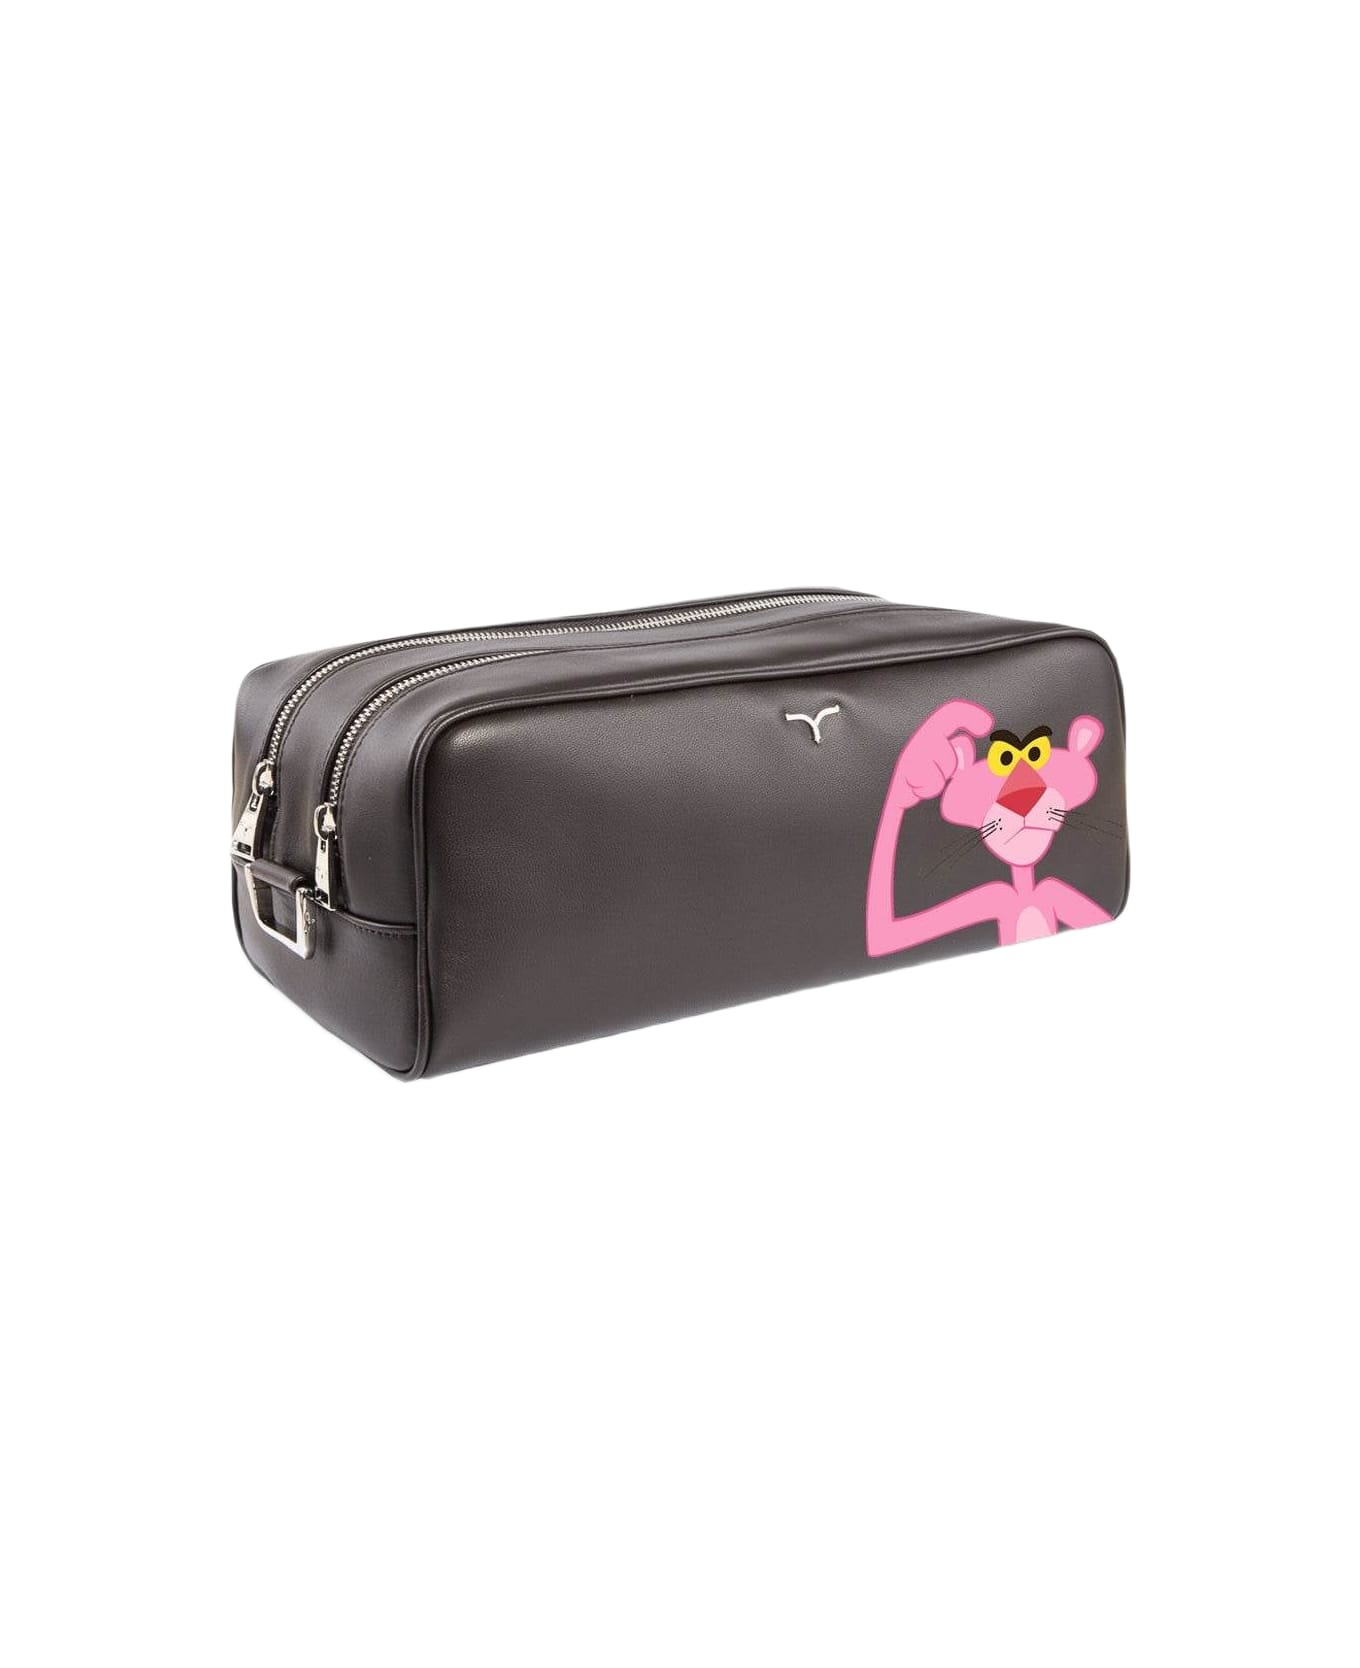 Larusmiani Nécessaire 'pink Panther' Luggage - Coffee トラベルバッグ